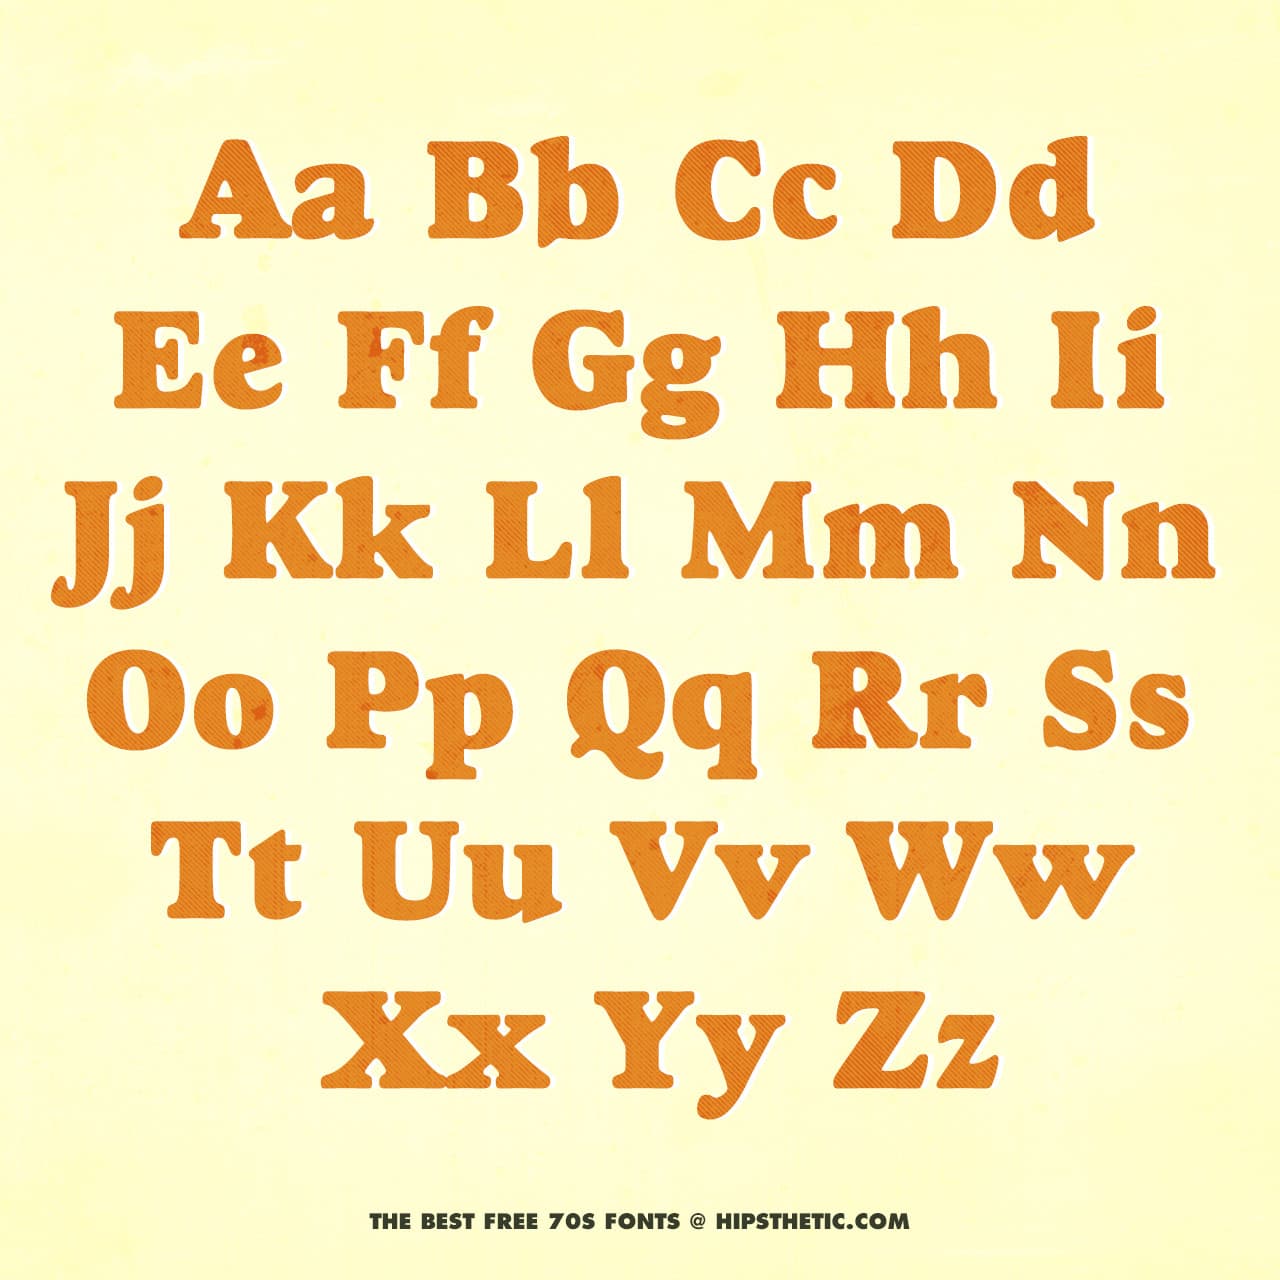 Goudy Heavyface - Free 1970s Font